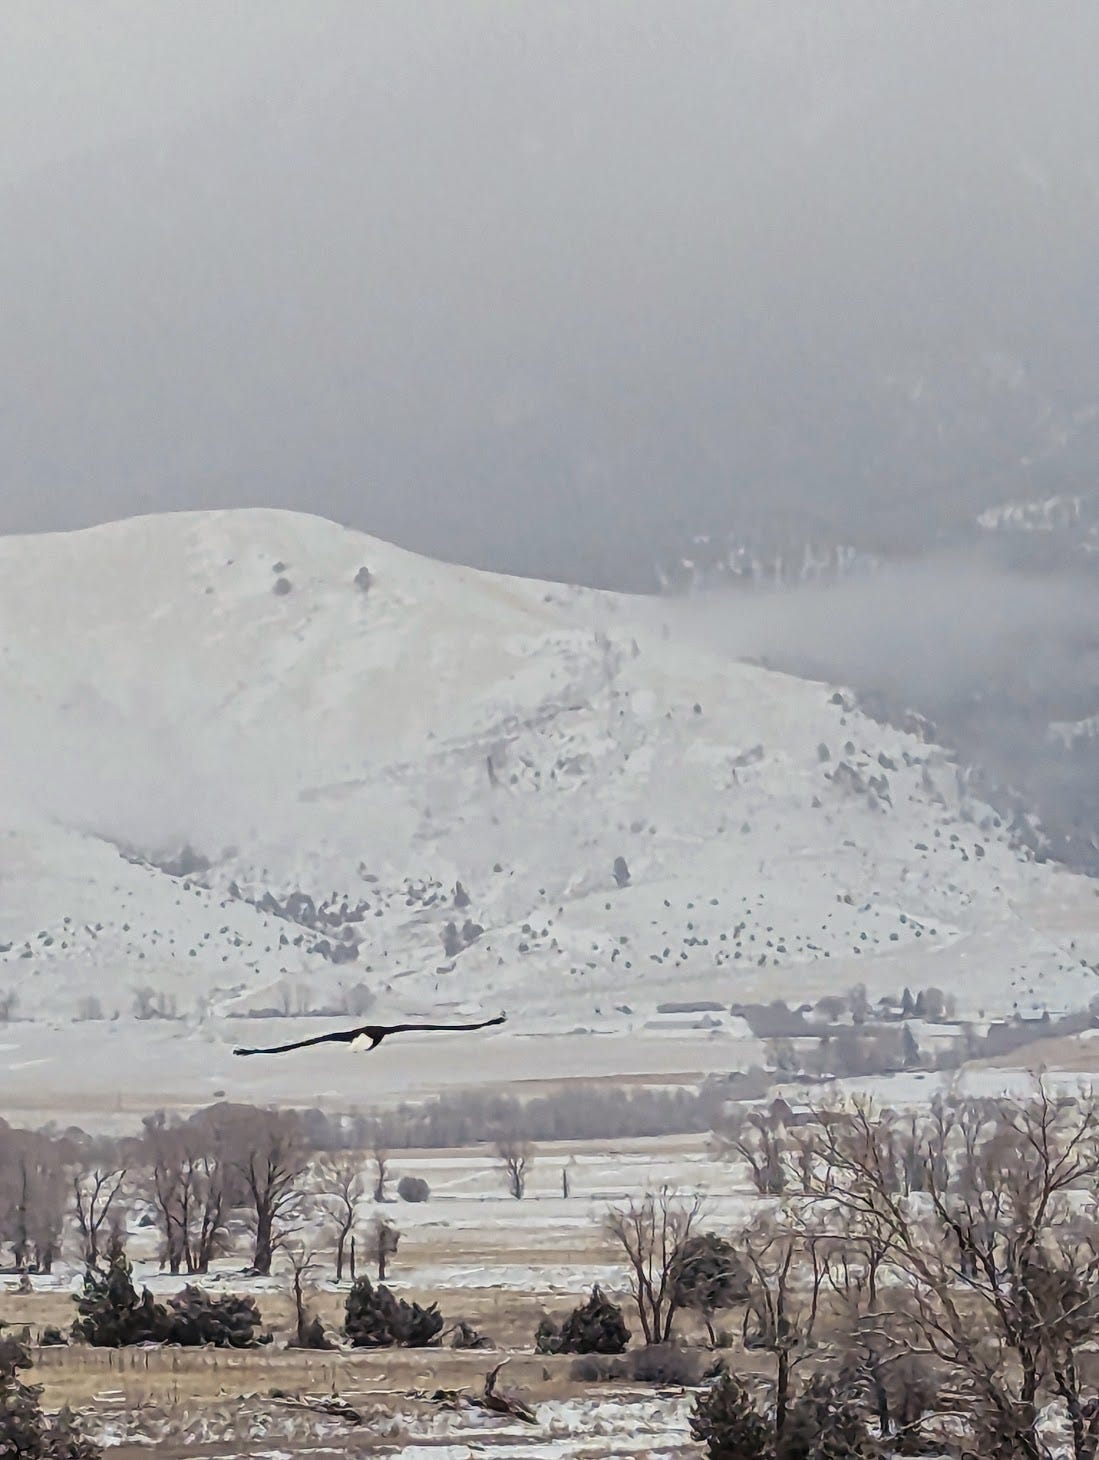 Eagle flying across Yellowstone River with mountains in backdrop